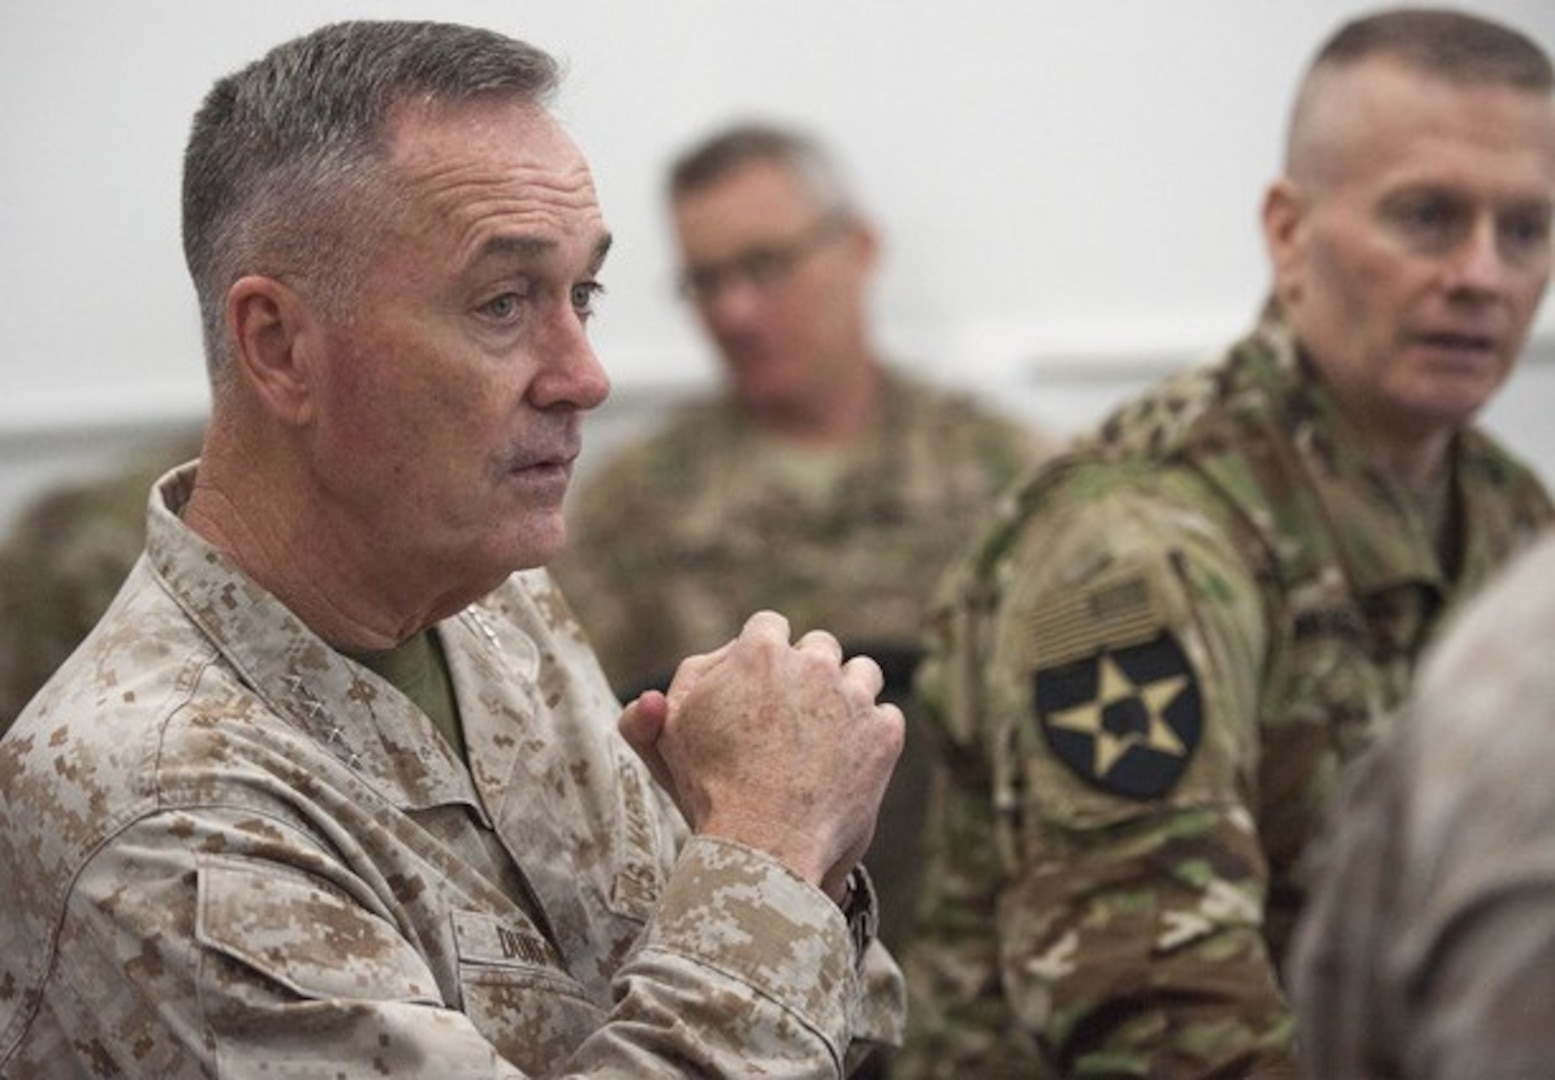 U.S. Marine Corps Gen. Joseph F. Dunford Jr., chairman of the Joint Chiefs of Staff, listens to a brief at the Combined Joint Operations Center in Baghdad, Jan. 8, 2016. (DoD Photo by Navy Petty Officer 2nd Class Dominique A. Pineiro)